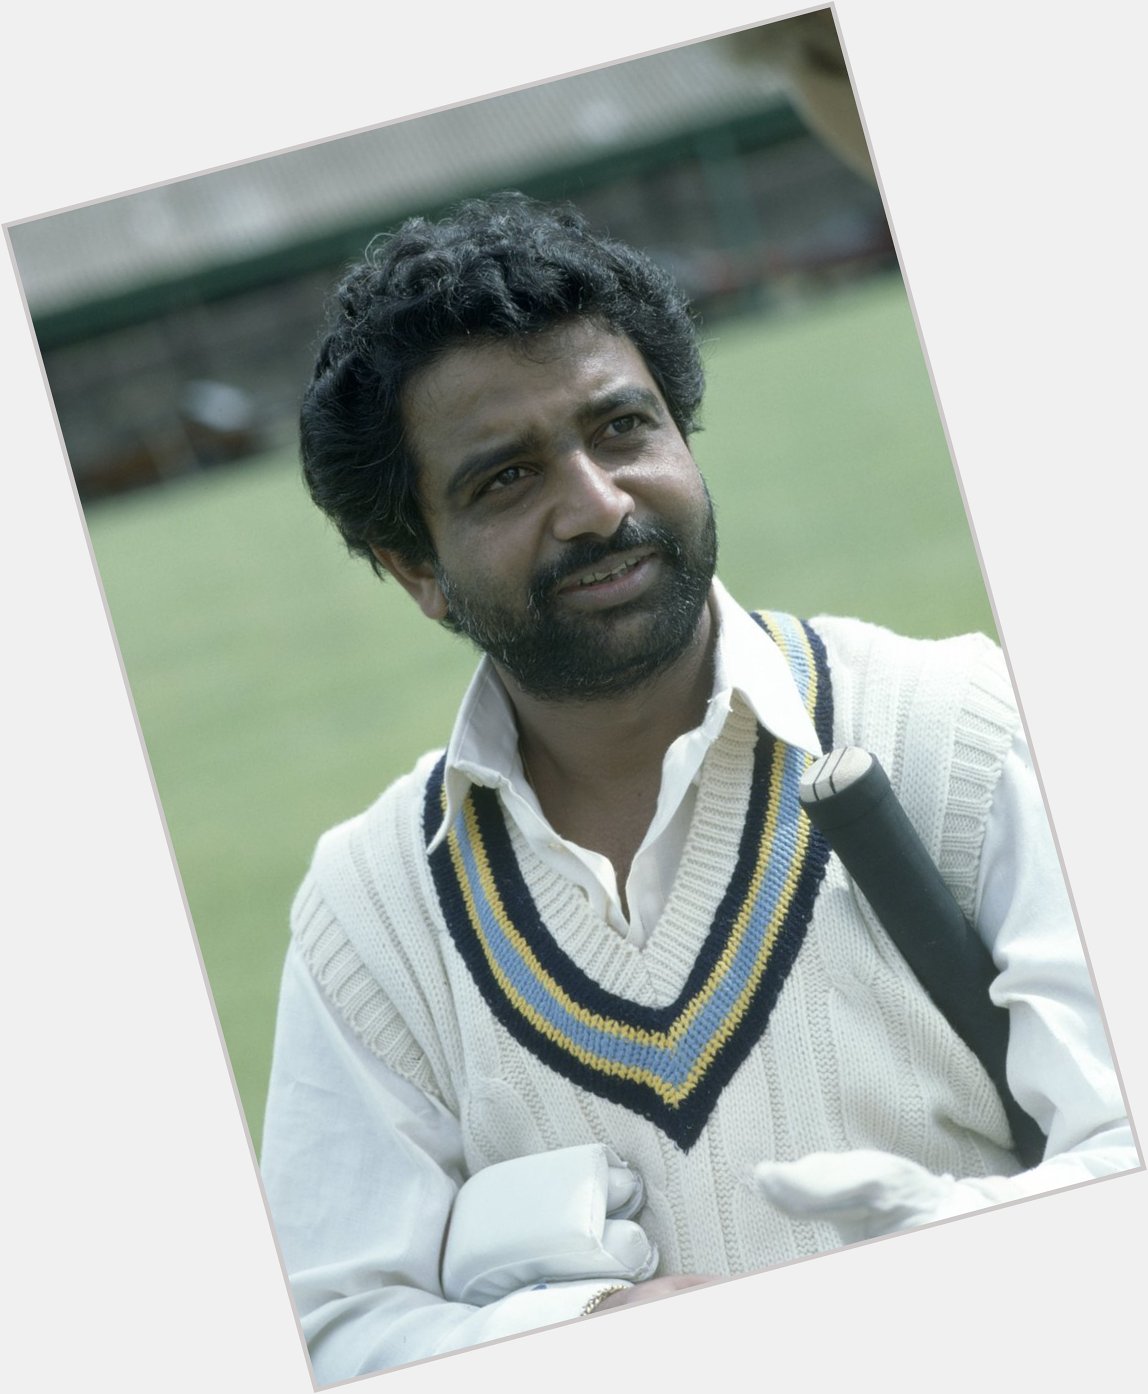 He top scored for India in the first CWC match of 1975, hitting 37 off 59 - Happy Birthday to Gundappa Viswanath! 